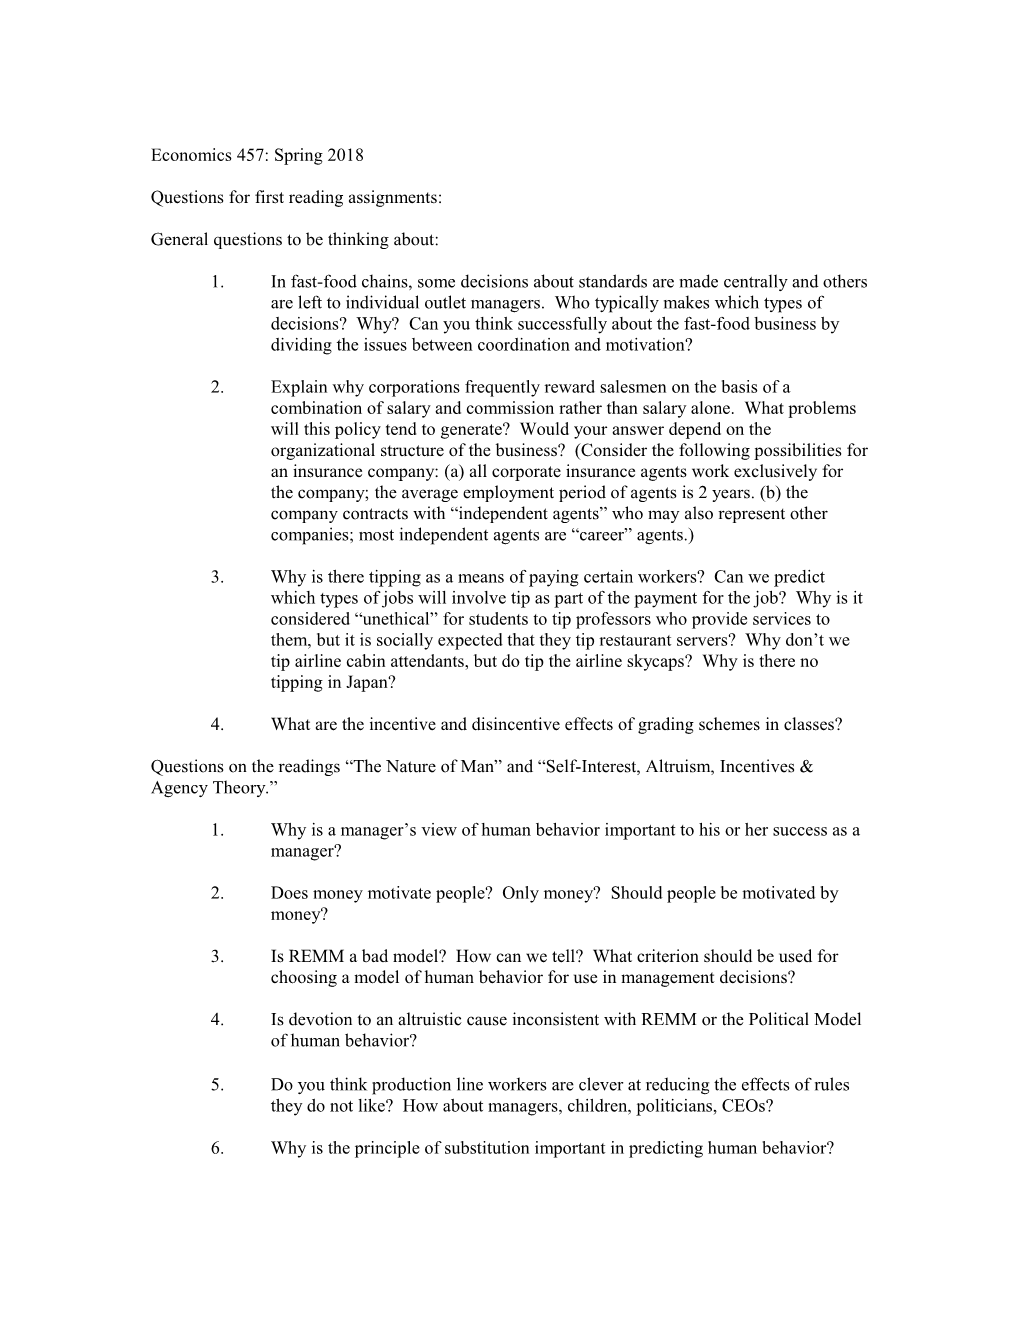 Questions: First Assignmentpage 1